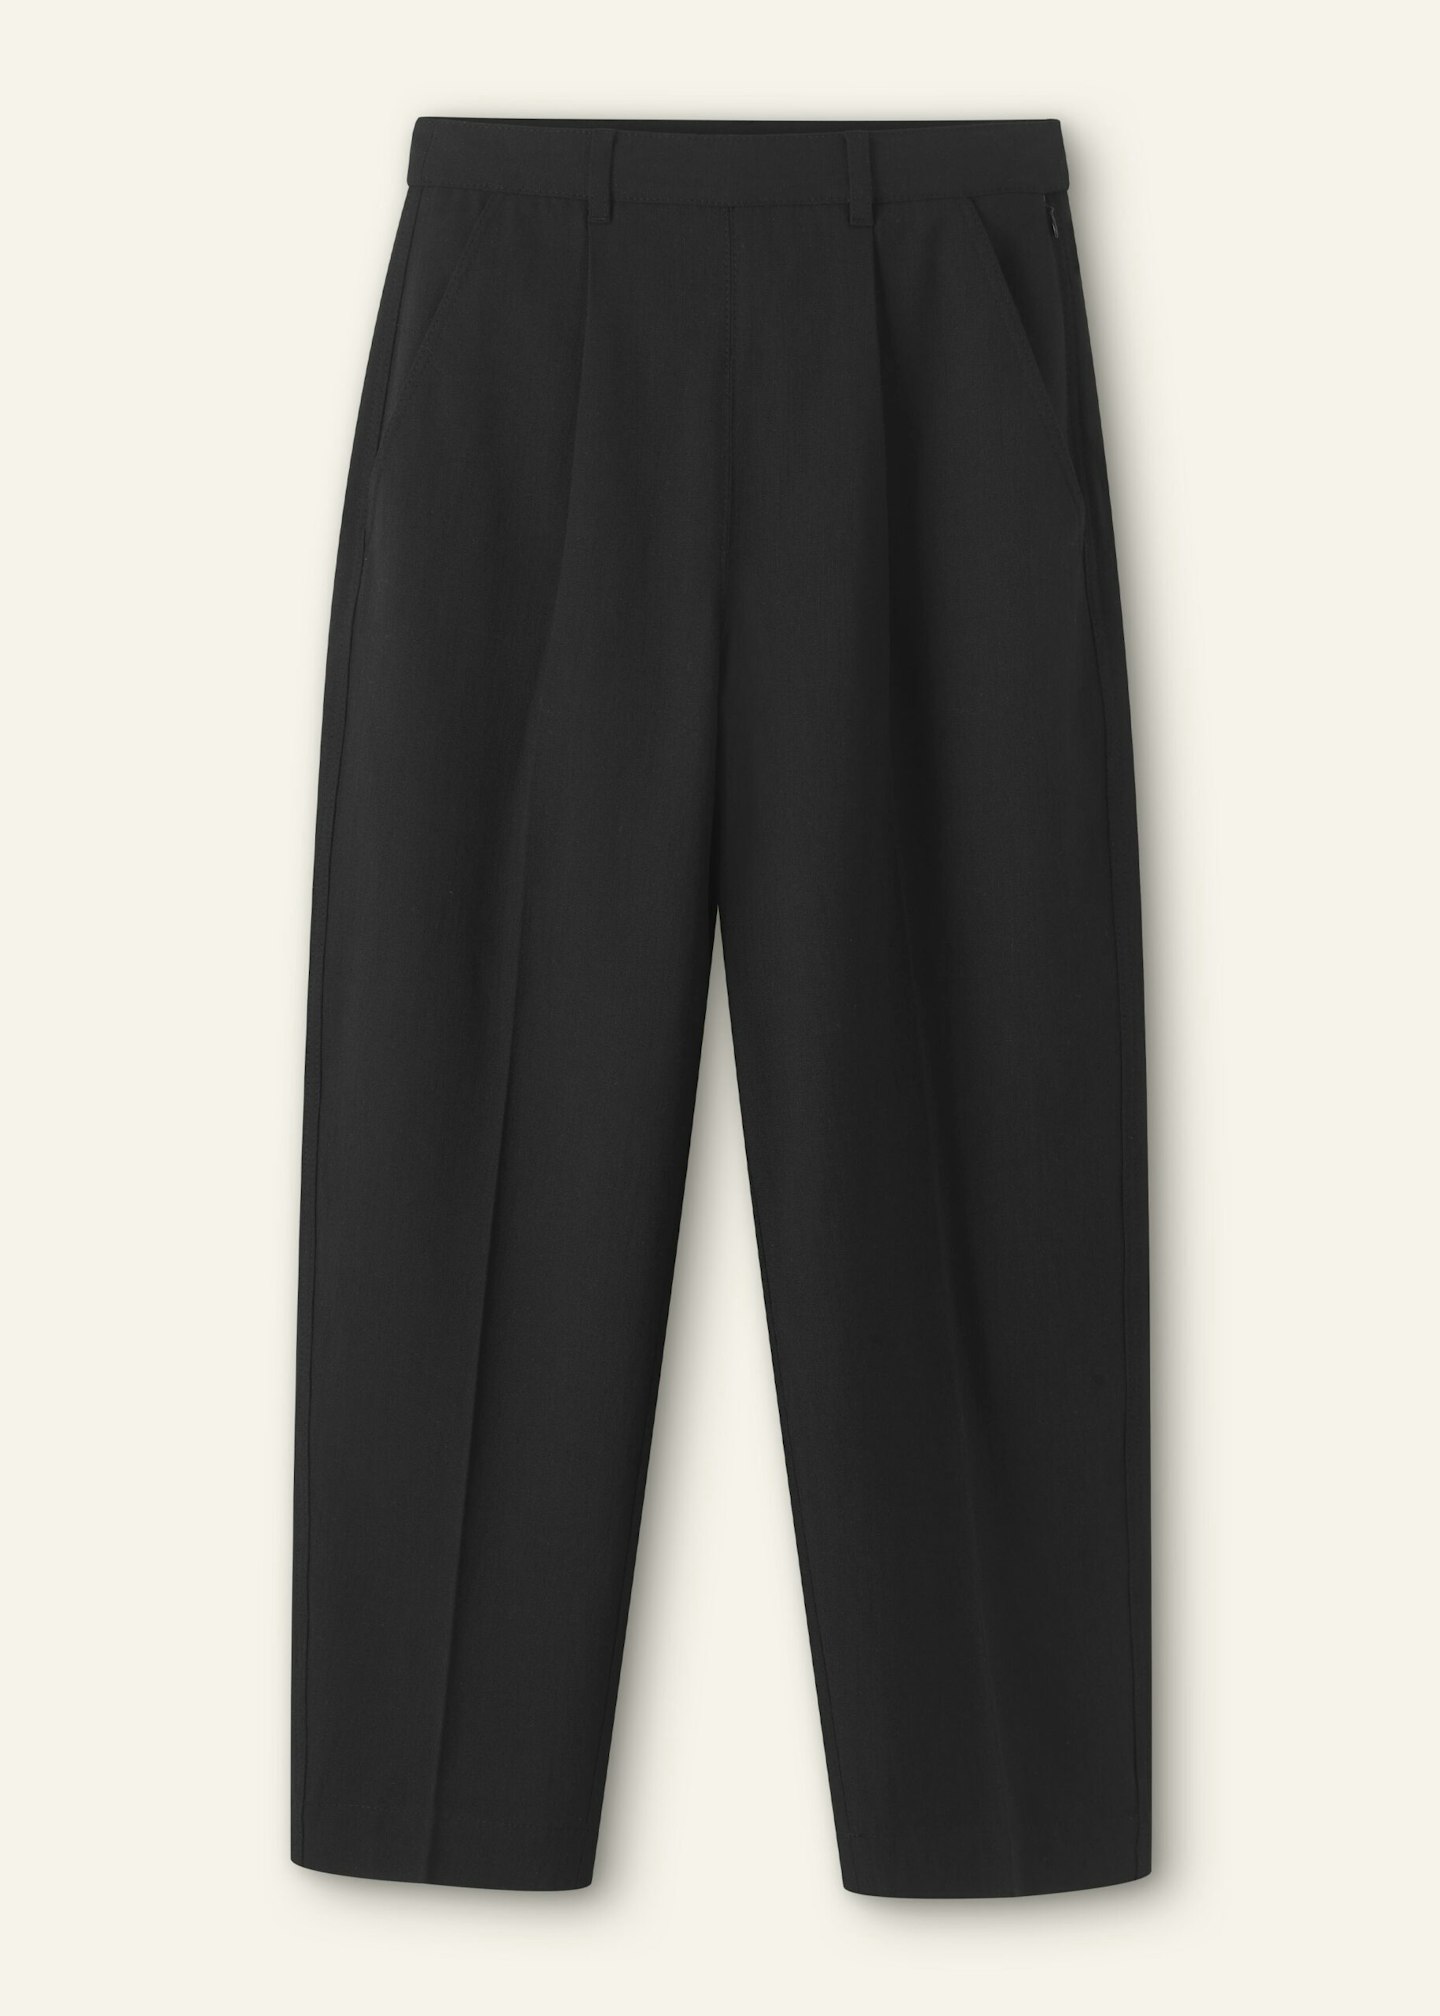 Me+Em, Textured Tailoring Tapered Trouser